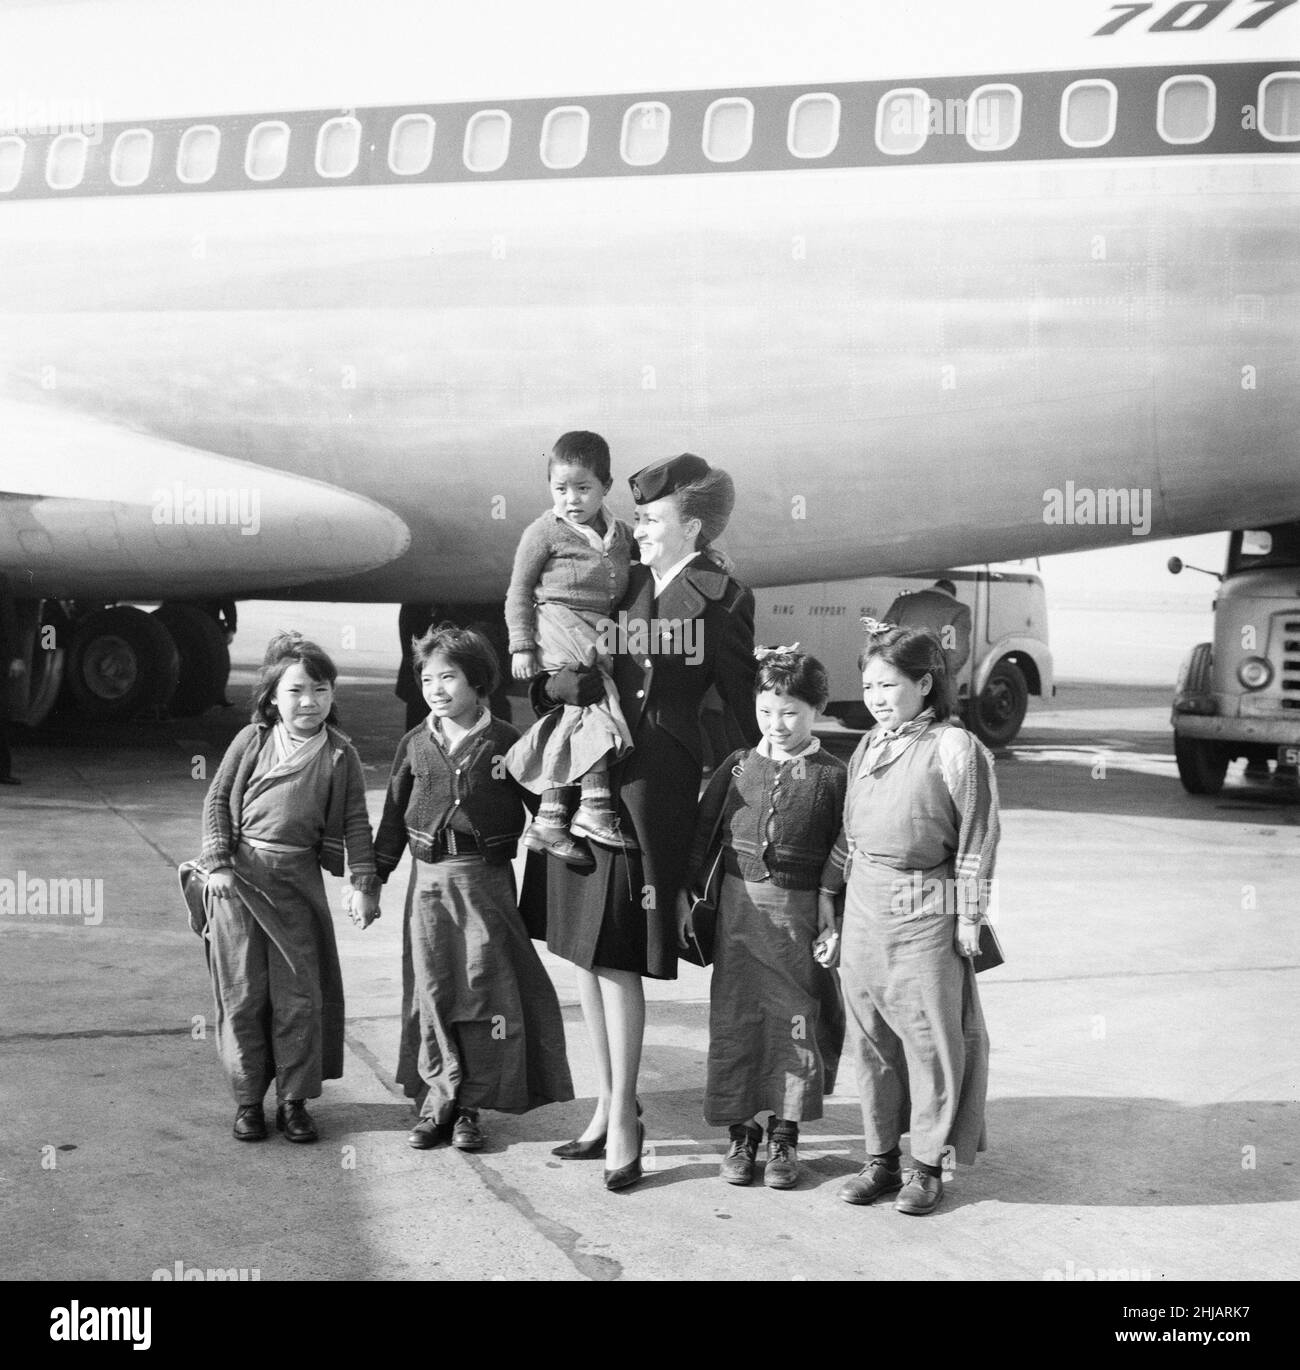 21 Tibetan Refugee Children land at London Heathrow Airport, Tuesday 26th February 1963. A BOAC Airliner brings the thirteen boys and eight girls to the UK, from a refugee camp in northern India. Many now orphaned, the children have fled chinese occupation and persecution.   Our Picture Show ... a BOAC air hostess leads six tibetan refugees away from aircraft.   The children are to be relocated to the Pestalozzi Village for Children in Sedlescombe, East Sussex, which will be their new home for the next ten years.   The community is named after eighteenth century Swiss educationalist, Johann He Stock Photo